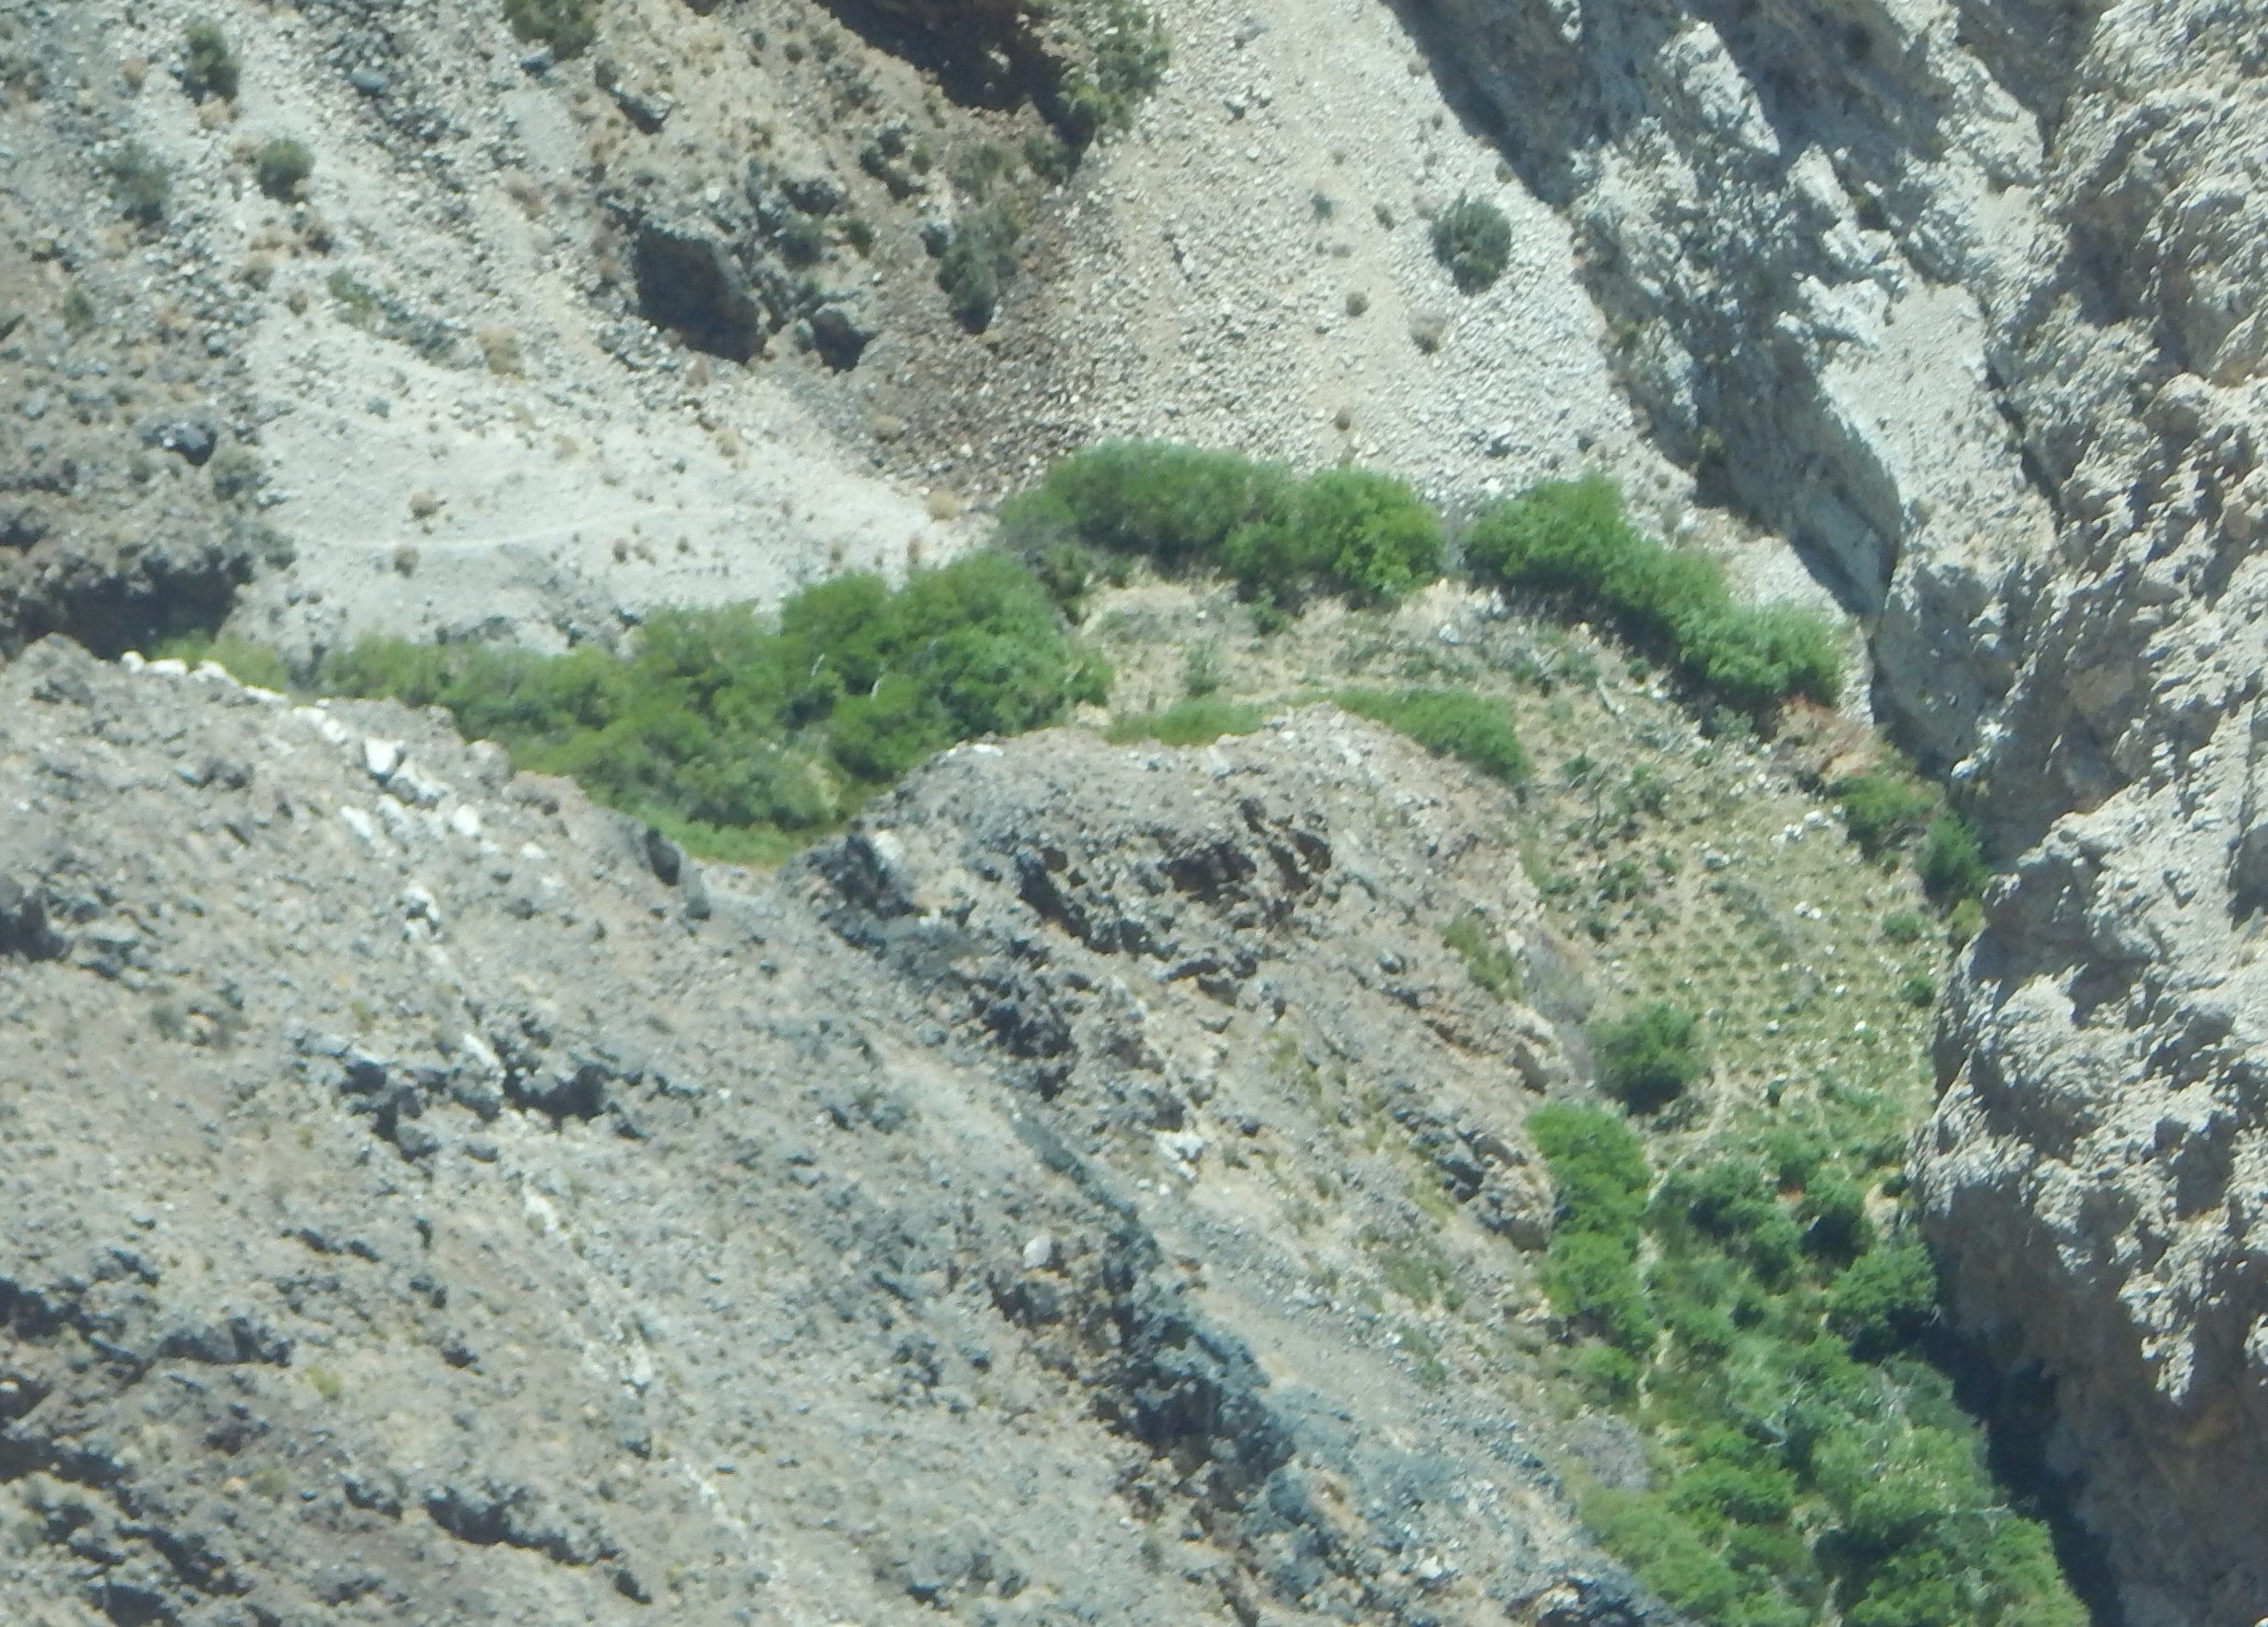 Photo taken from an airplane looking straight down. Drab-colored desert slopes surround a strip of bright green plants, including evenly spaced green dots.